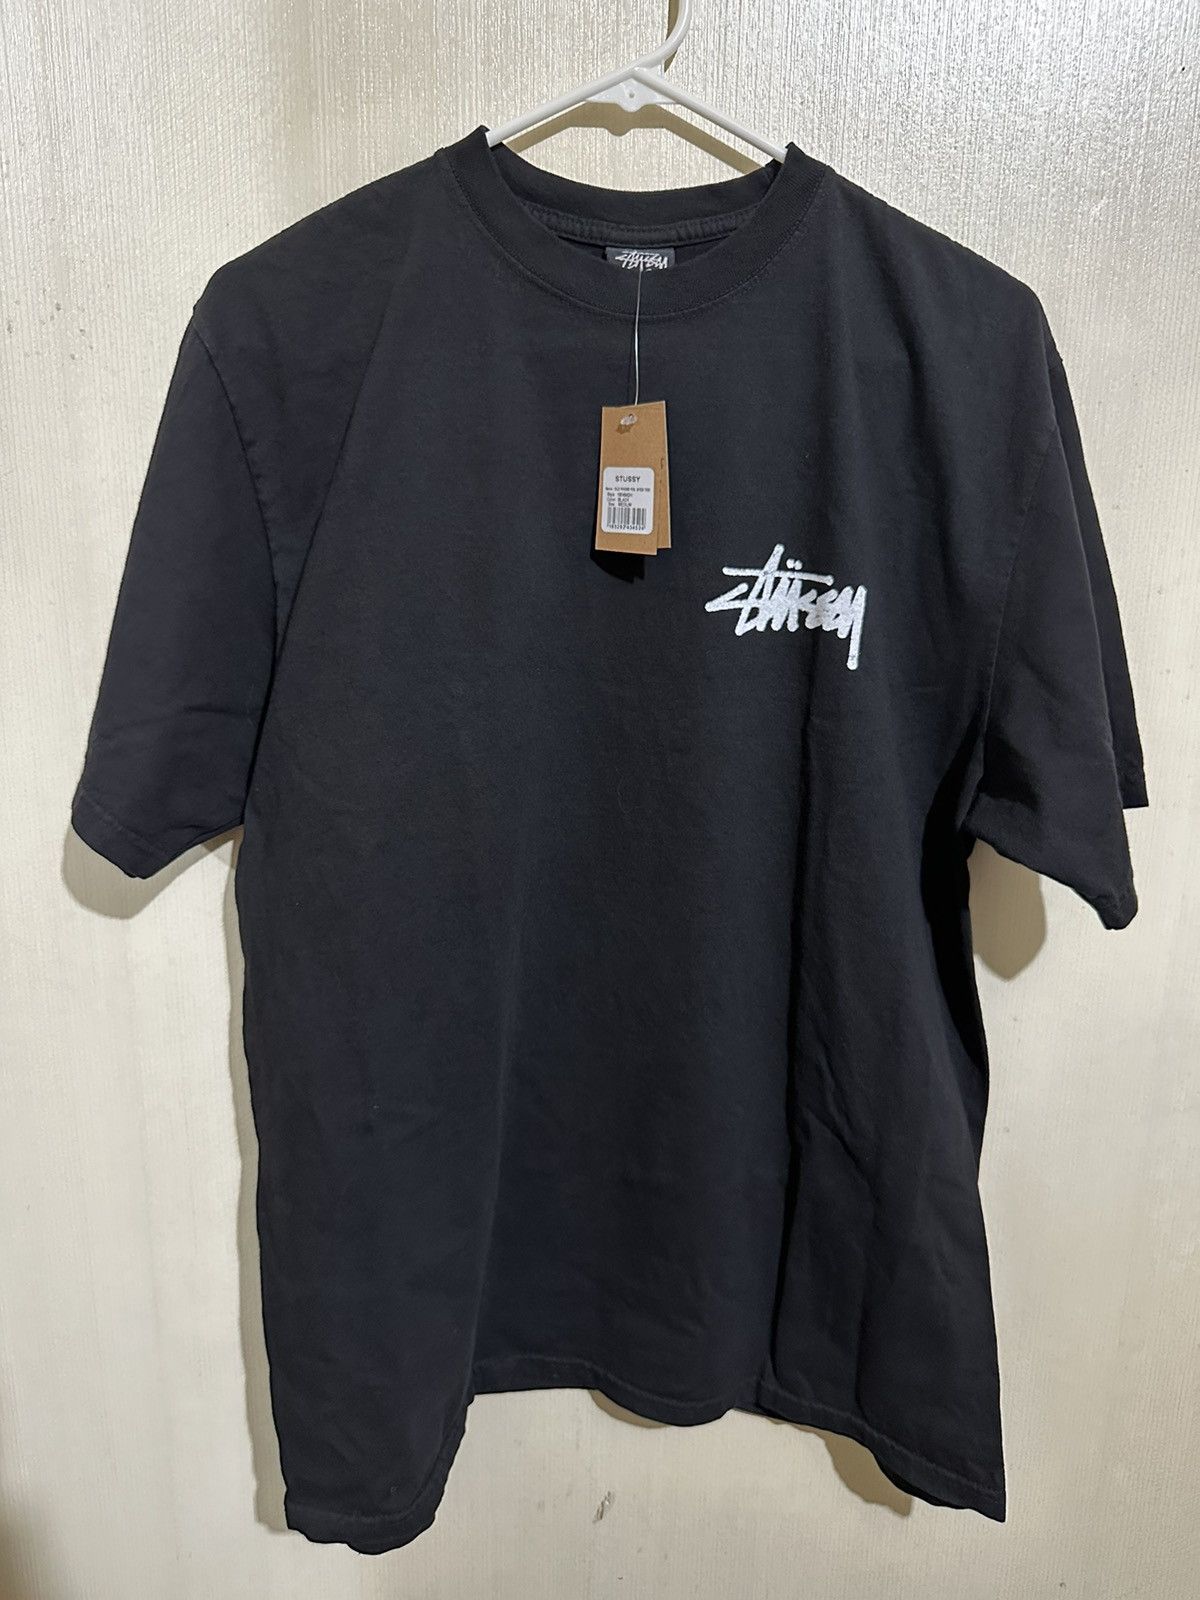 Stussy Stüssy Old Phone Tee Pigment Dyed | Grailed